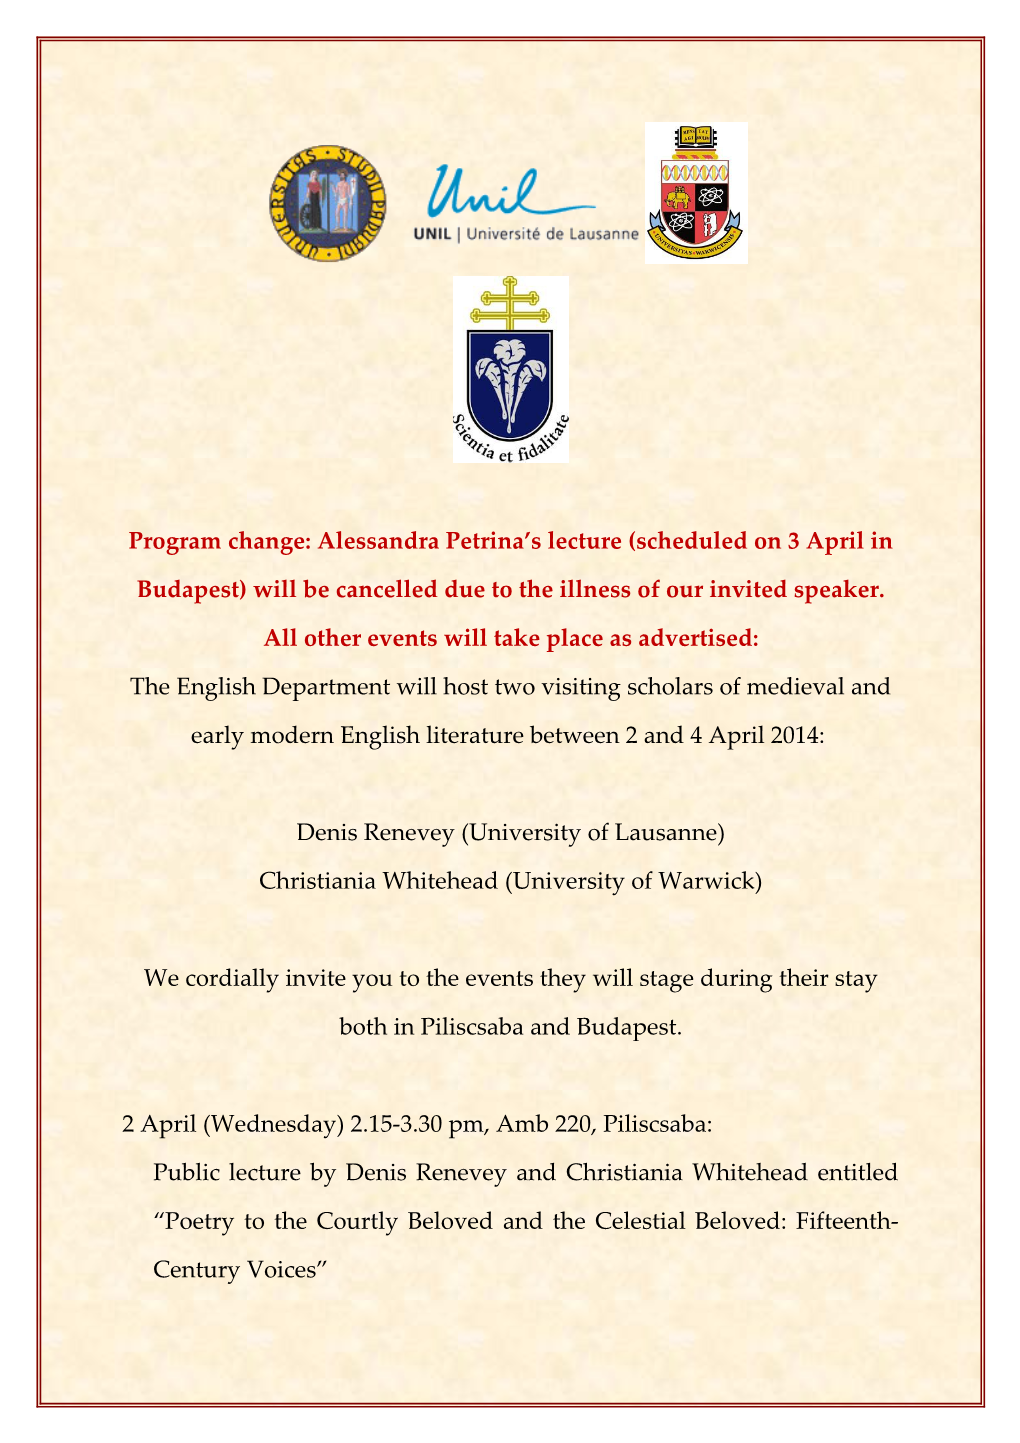 The English Department Cordially Invites You to the Public Lecture On